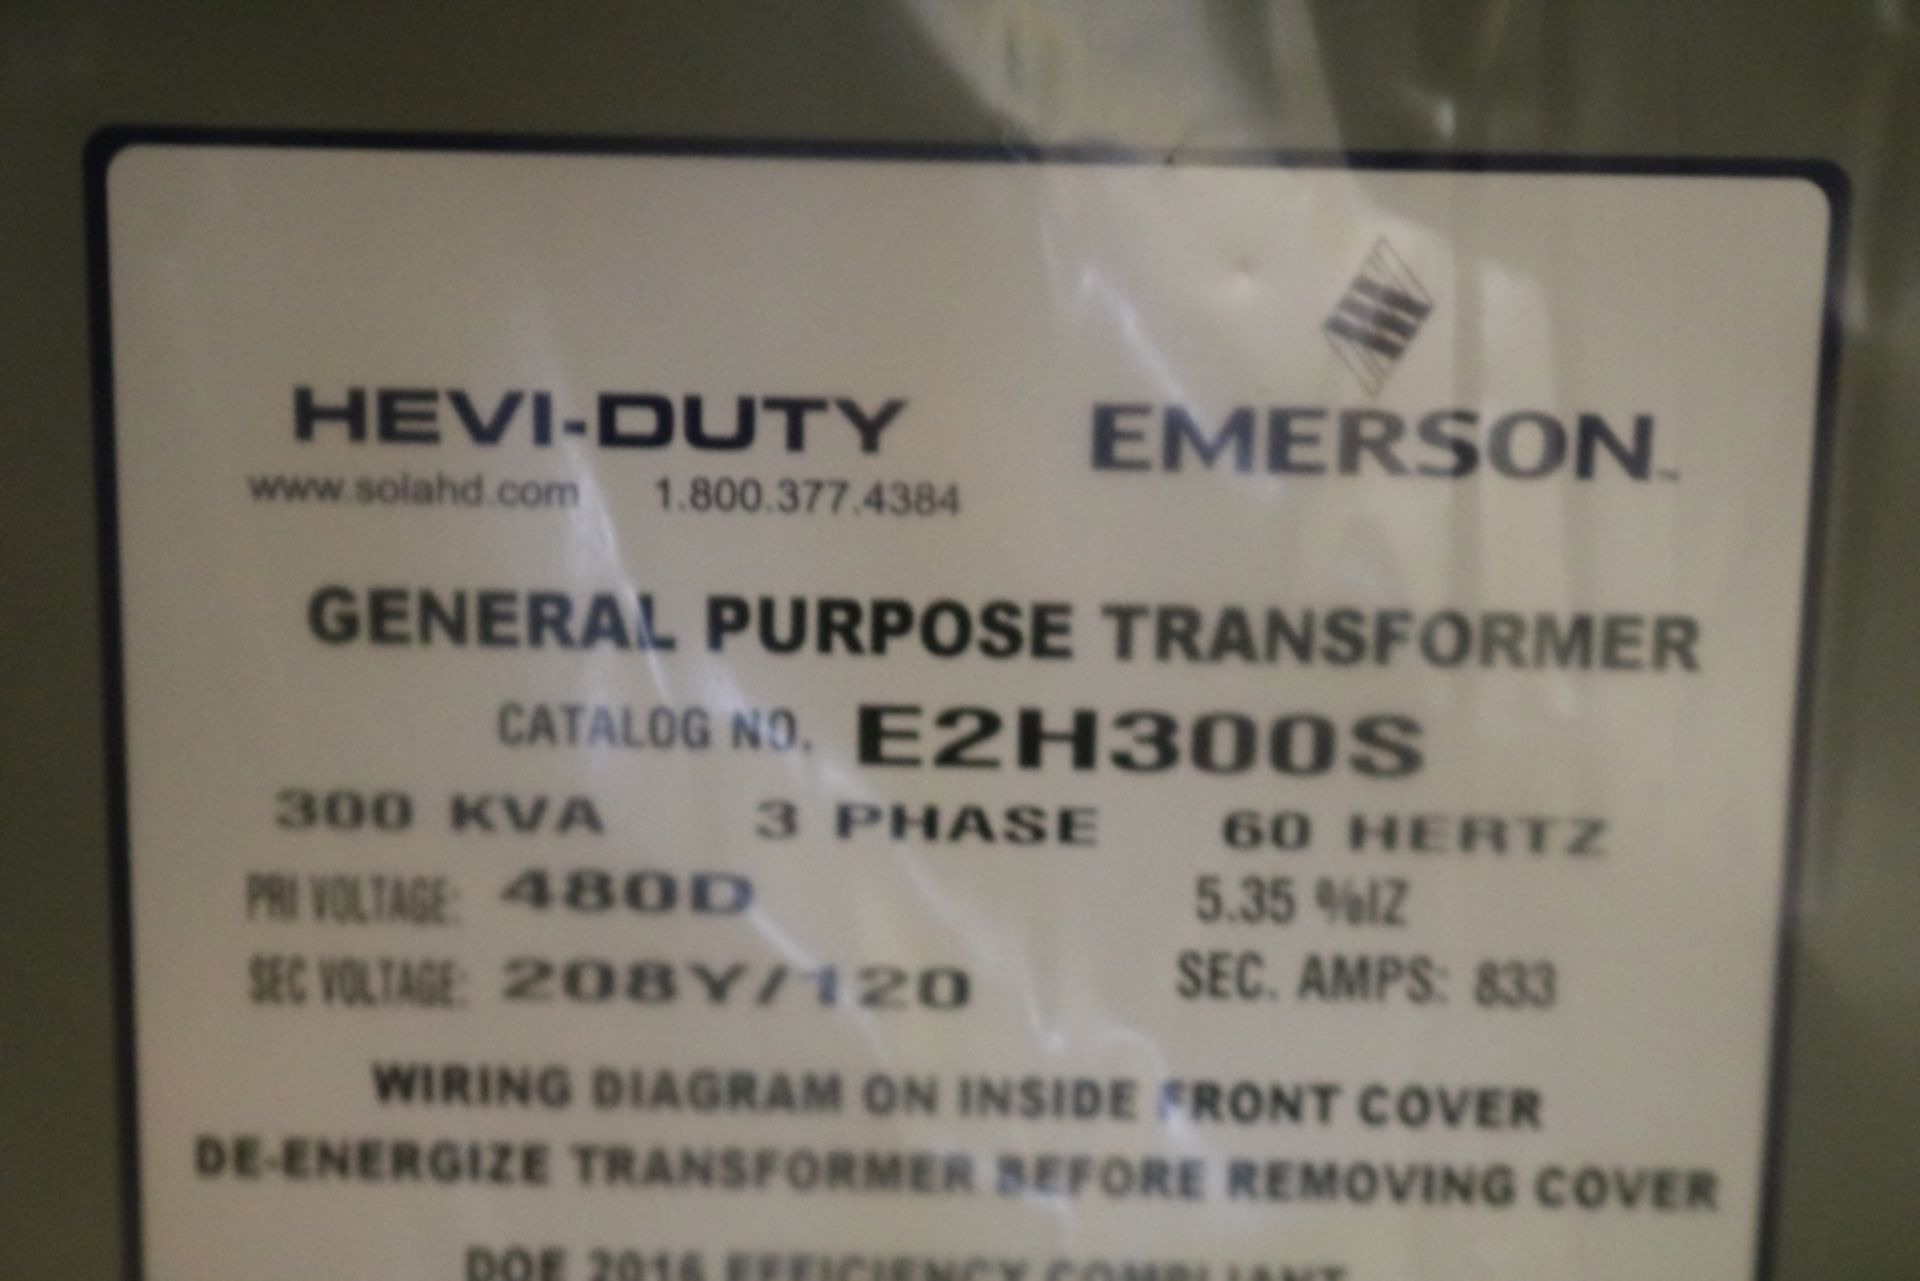 Remote Cover LEC (1650), New Transformer From Kirby Risk, Heavy Duty Emerson, General Purpose - Image 4 of 9